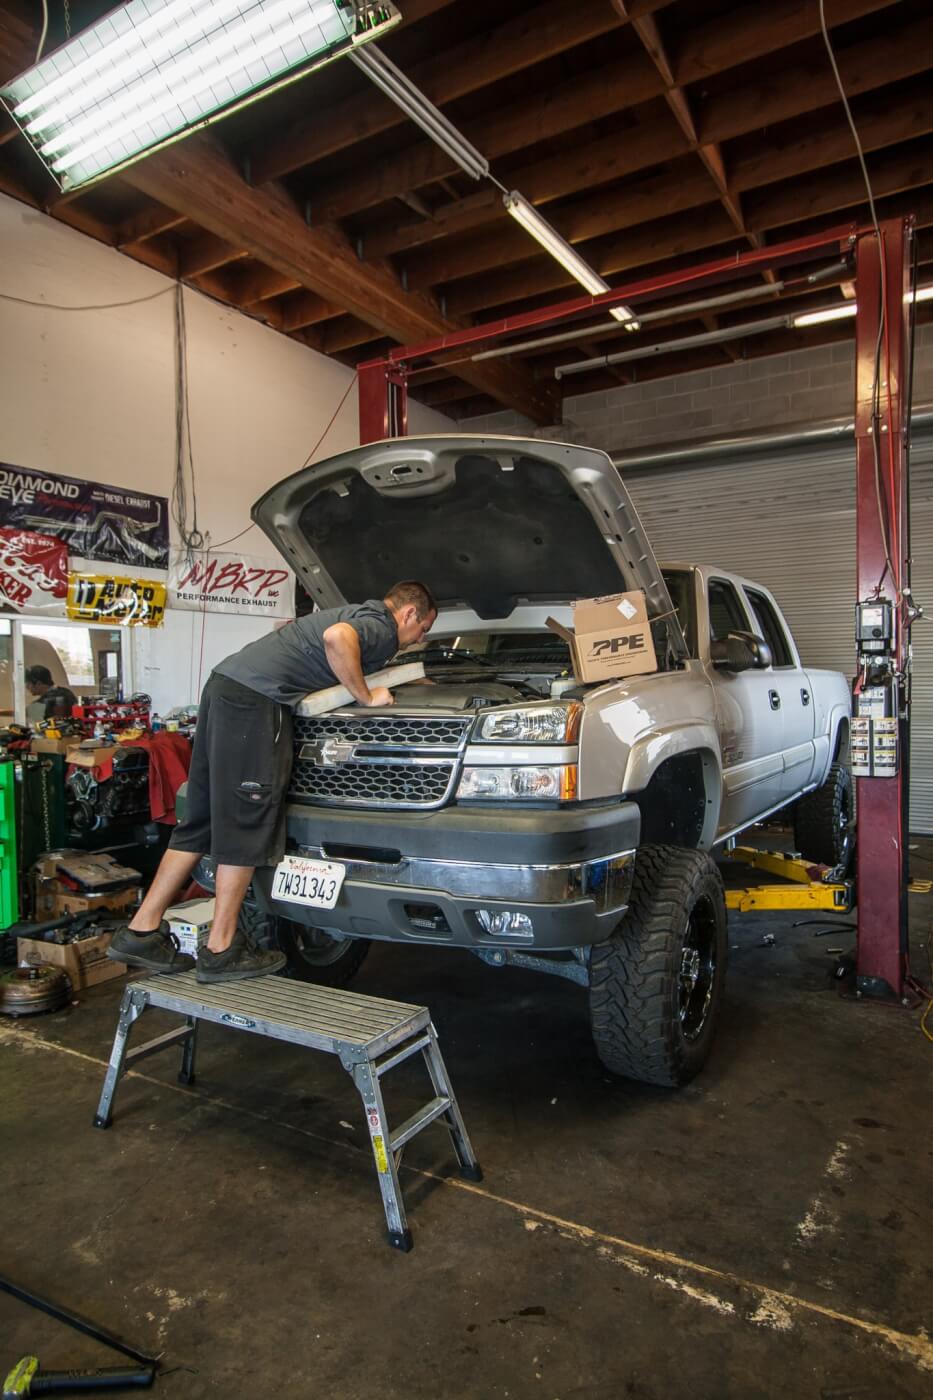 1. Master tech Ethan Barker of Left Coast Diesel helped us install the trio of affordable Duramax fueling modifications that made significant improvements in acceleration on our test truck, especially out of hole.